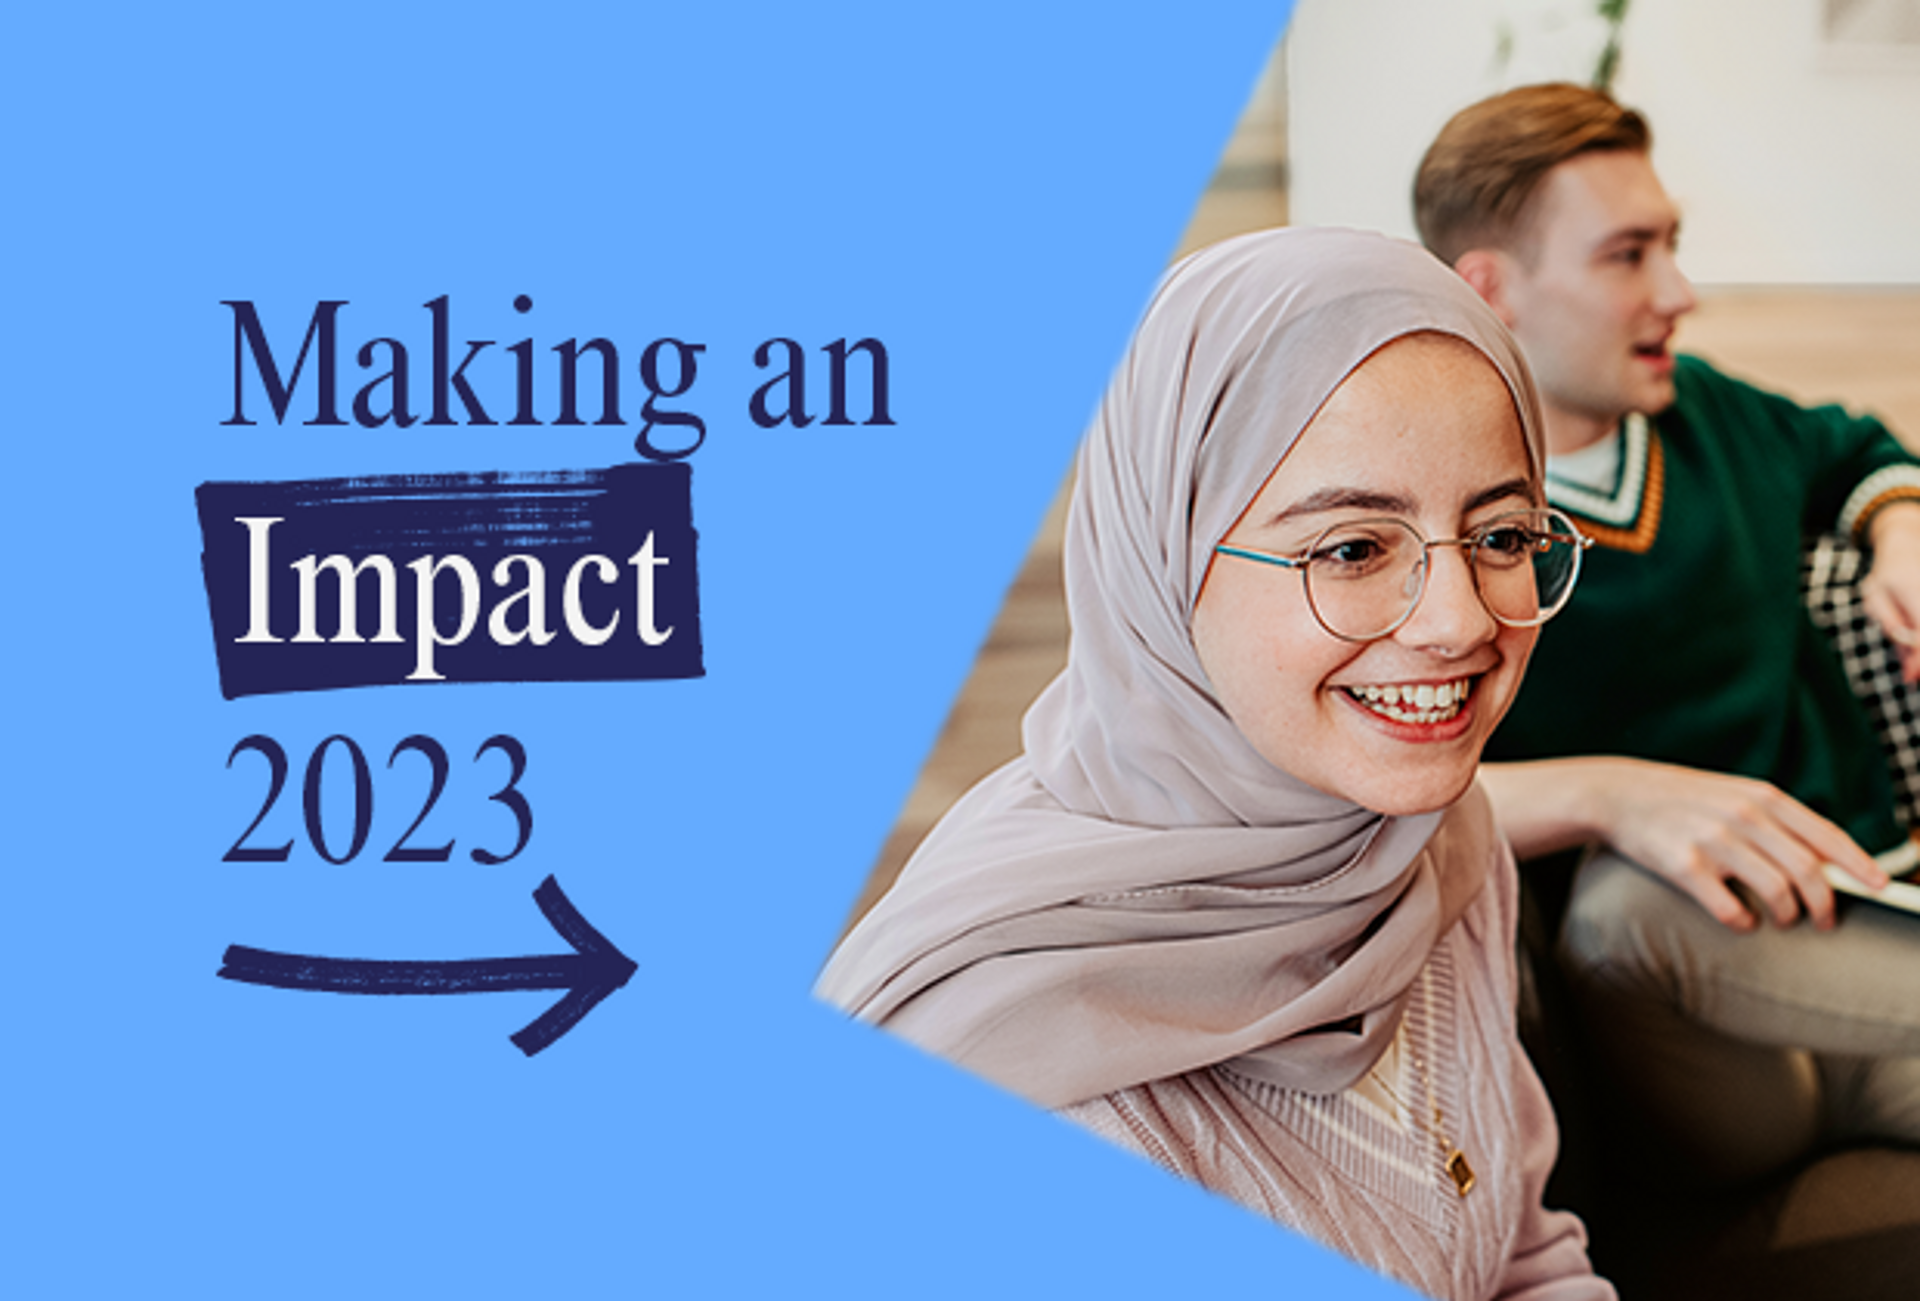 The words "Making an Impact 2023", with an image of an apprentice smiling